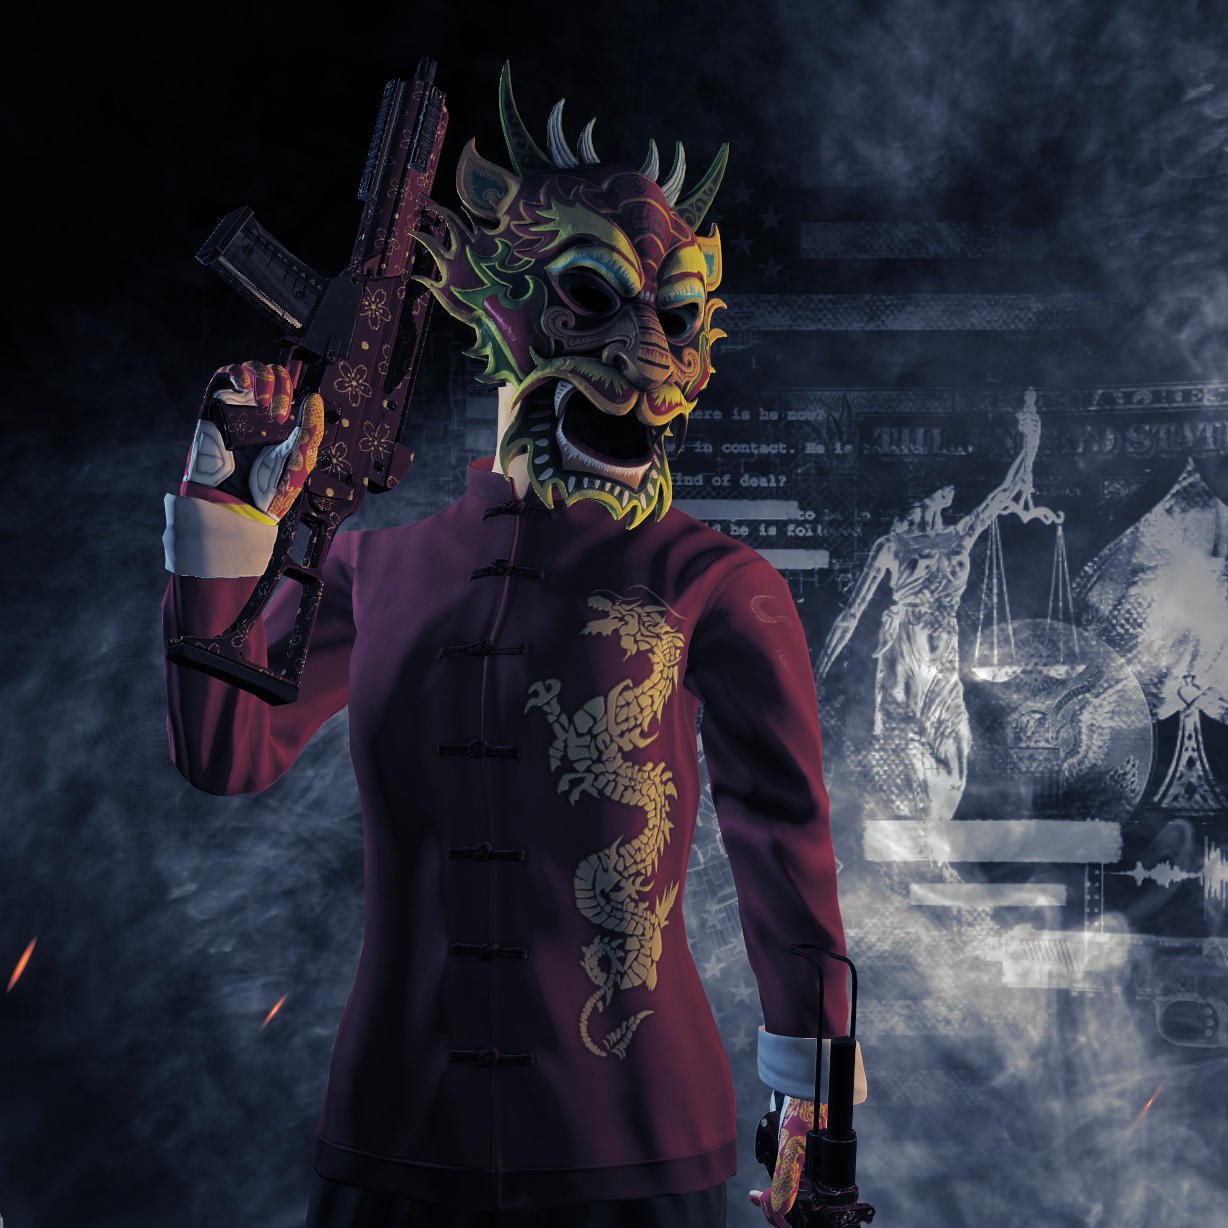 where do the files go payday 2 bundle modder